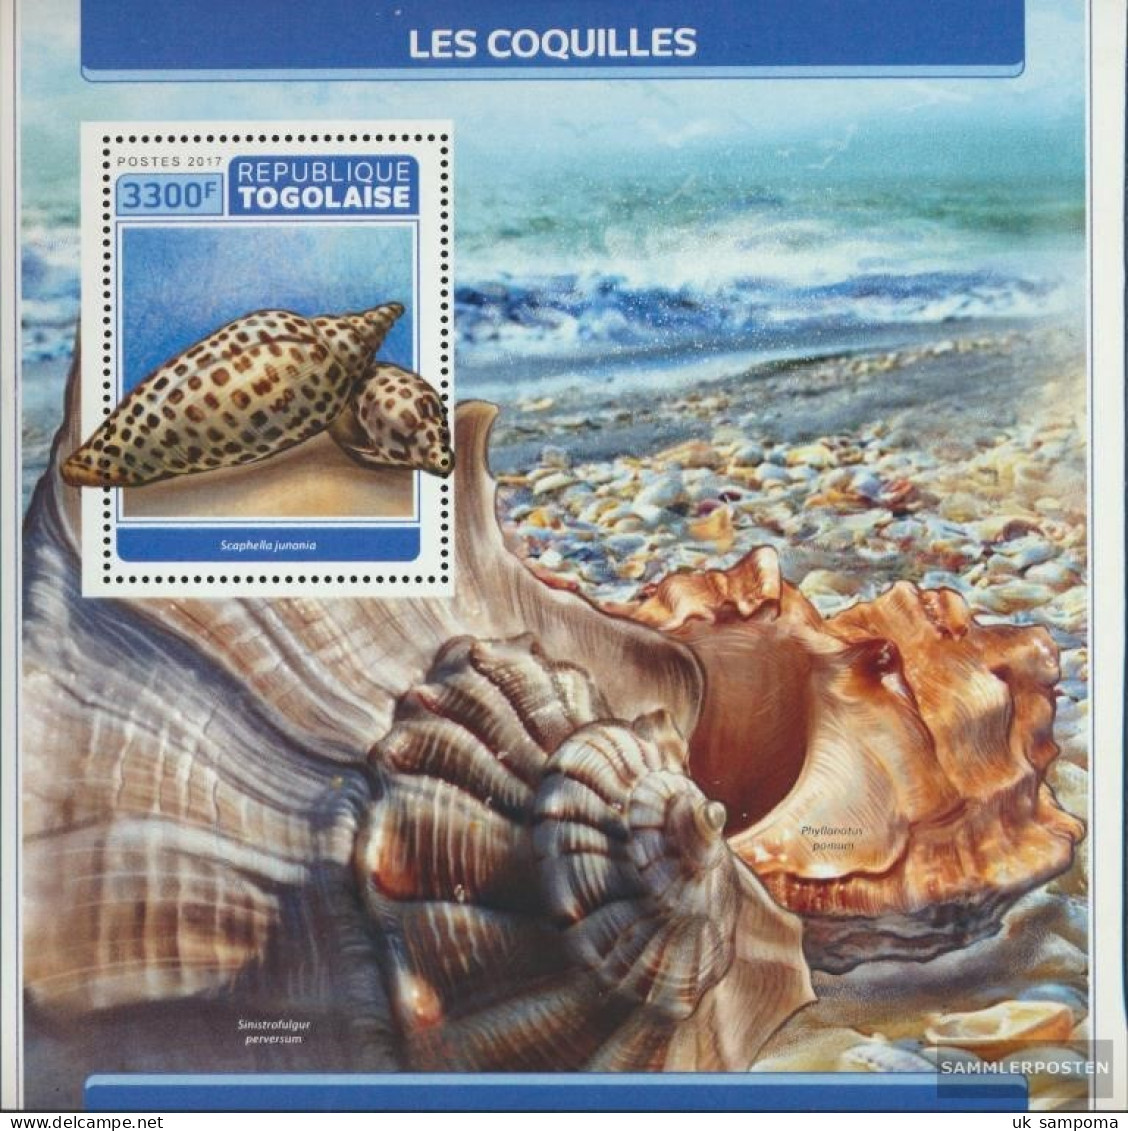 Togo Miniature Sheet 1445 (complete. Issue) Unmounted Mint / Never Hinged 2017 Mussels - Togo (1960-...)